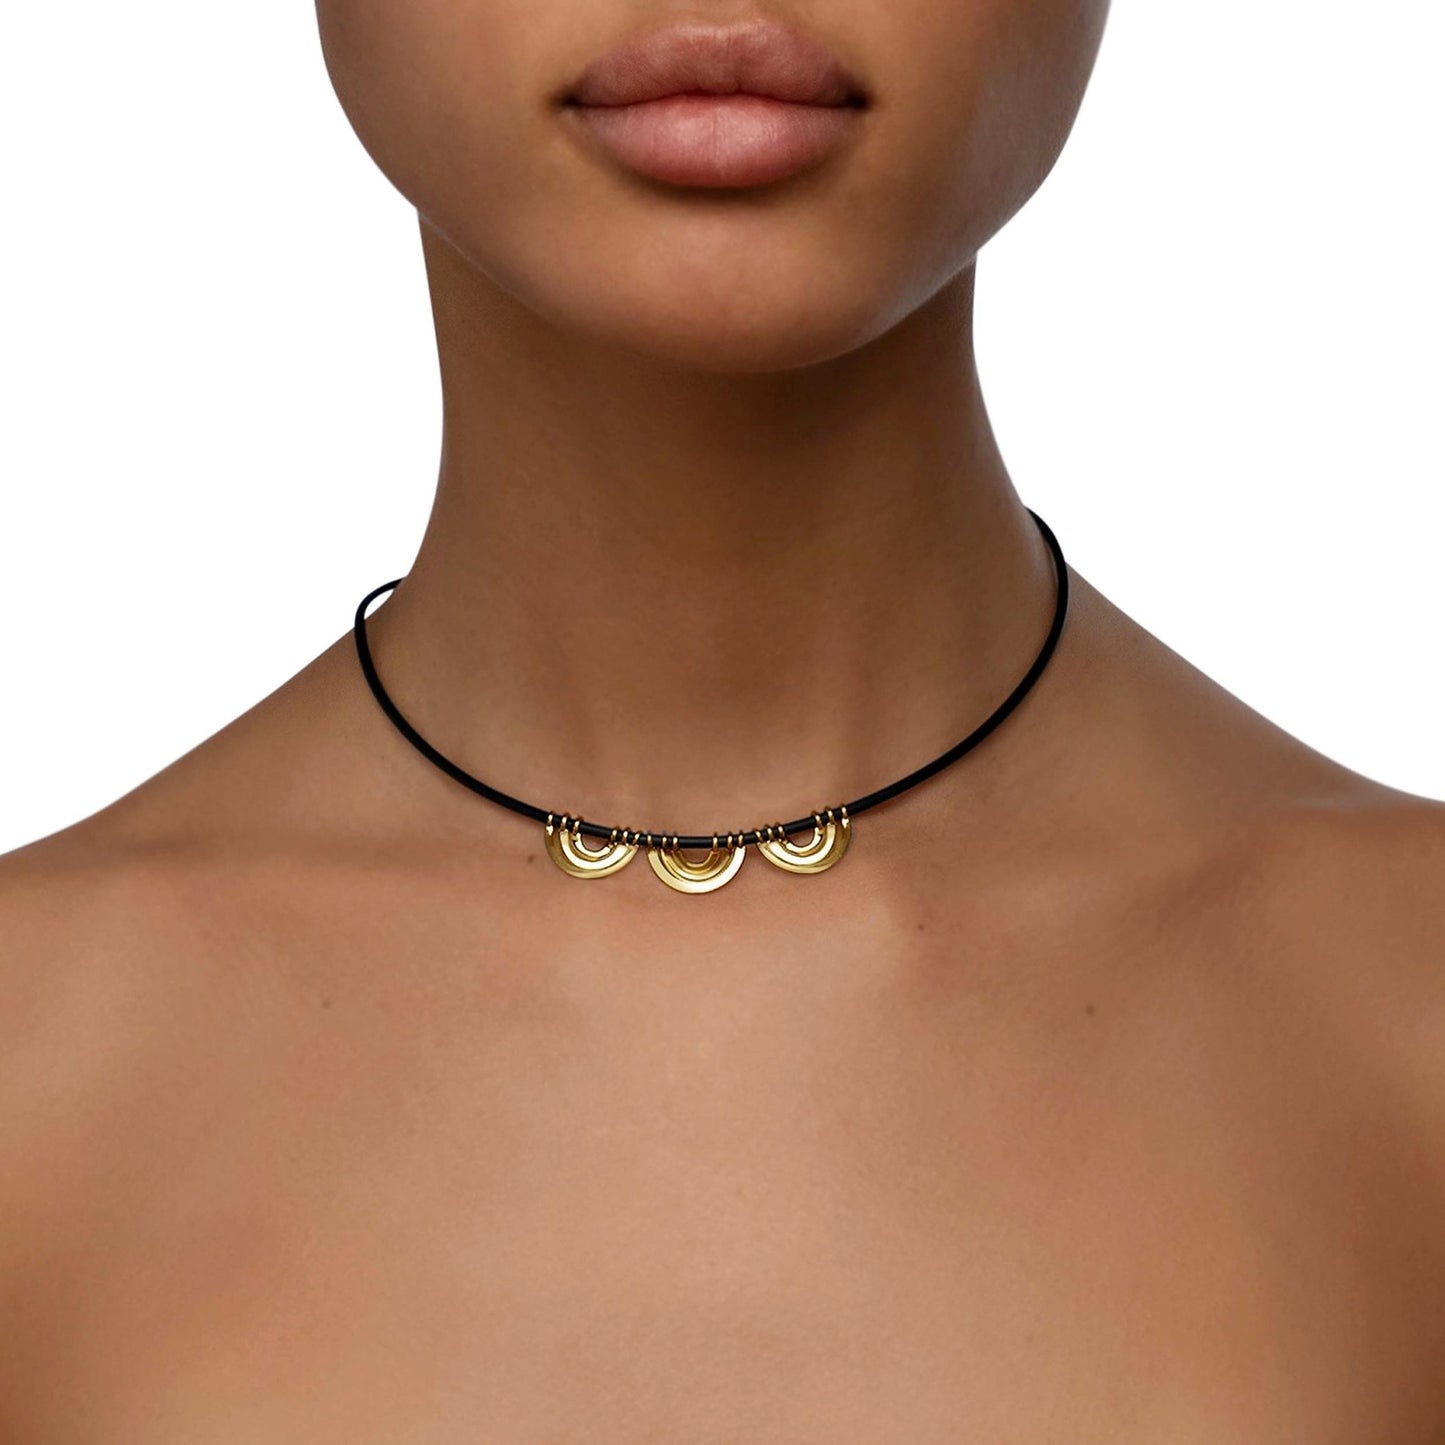 Yellow Gold Water Alternative Necklace with Black Rubber and 3 Wave Beads - Cadar